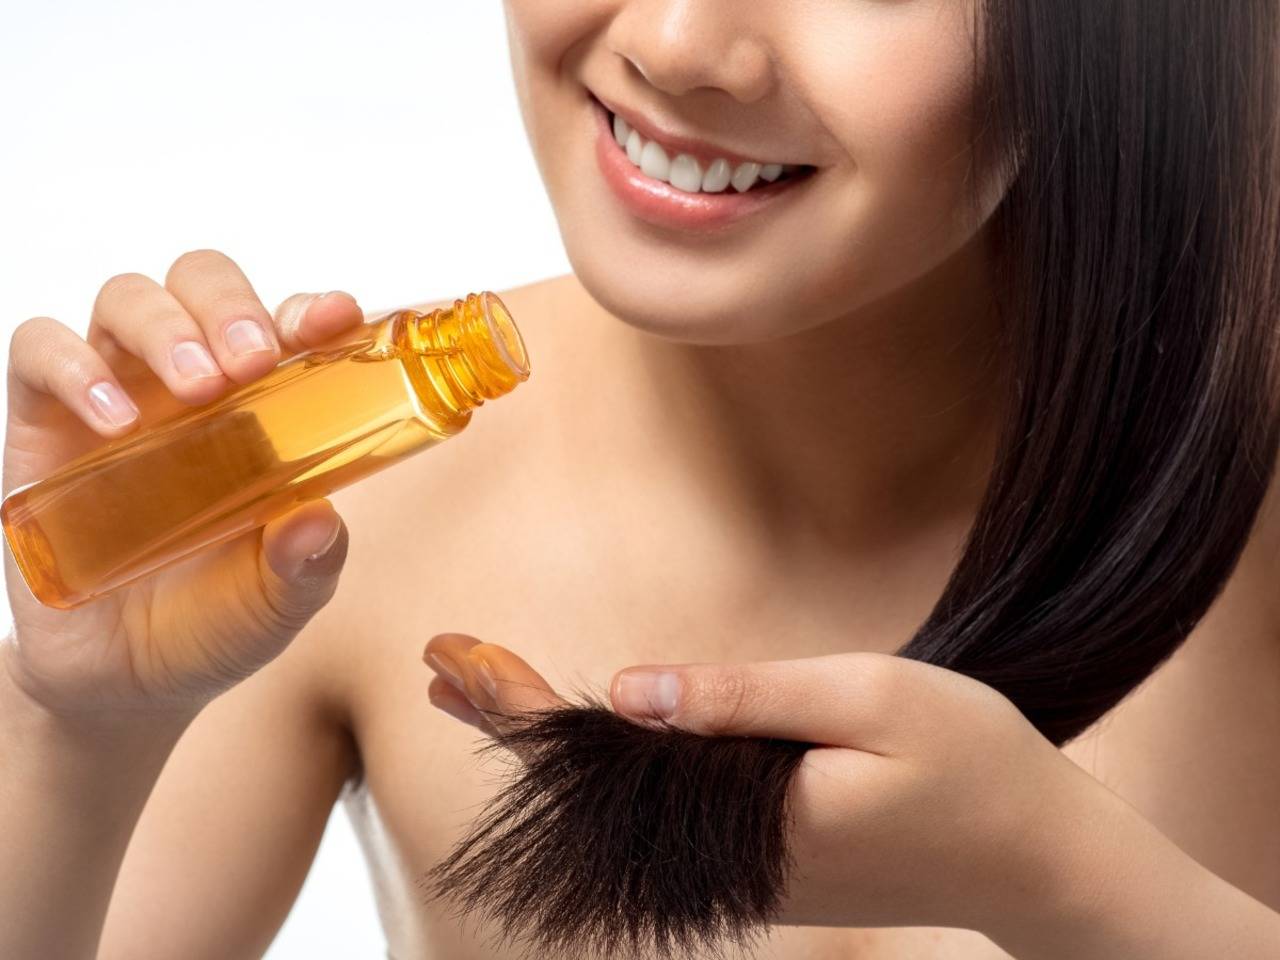 Hair Care Photos Download The BEST Free Hair Care Stock Photos  HD Images